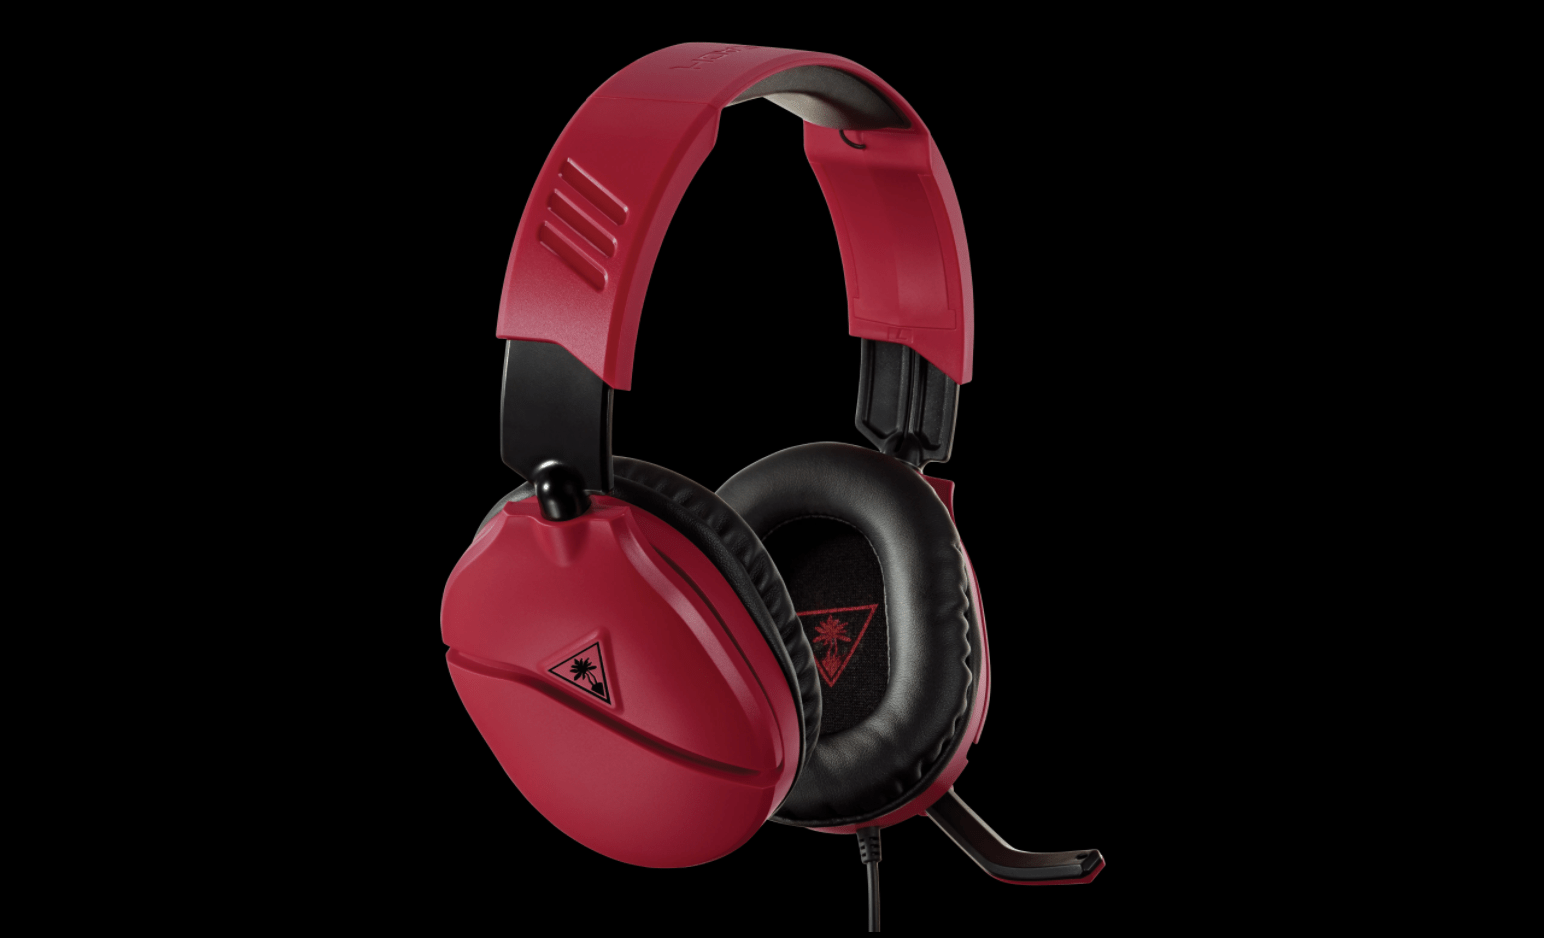 https://de.turtlebeach.com/collections/switch/products/recon-70-headset-nintendo-switch-midnight-red